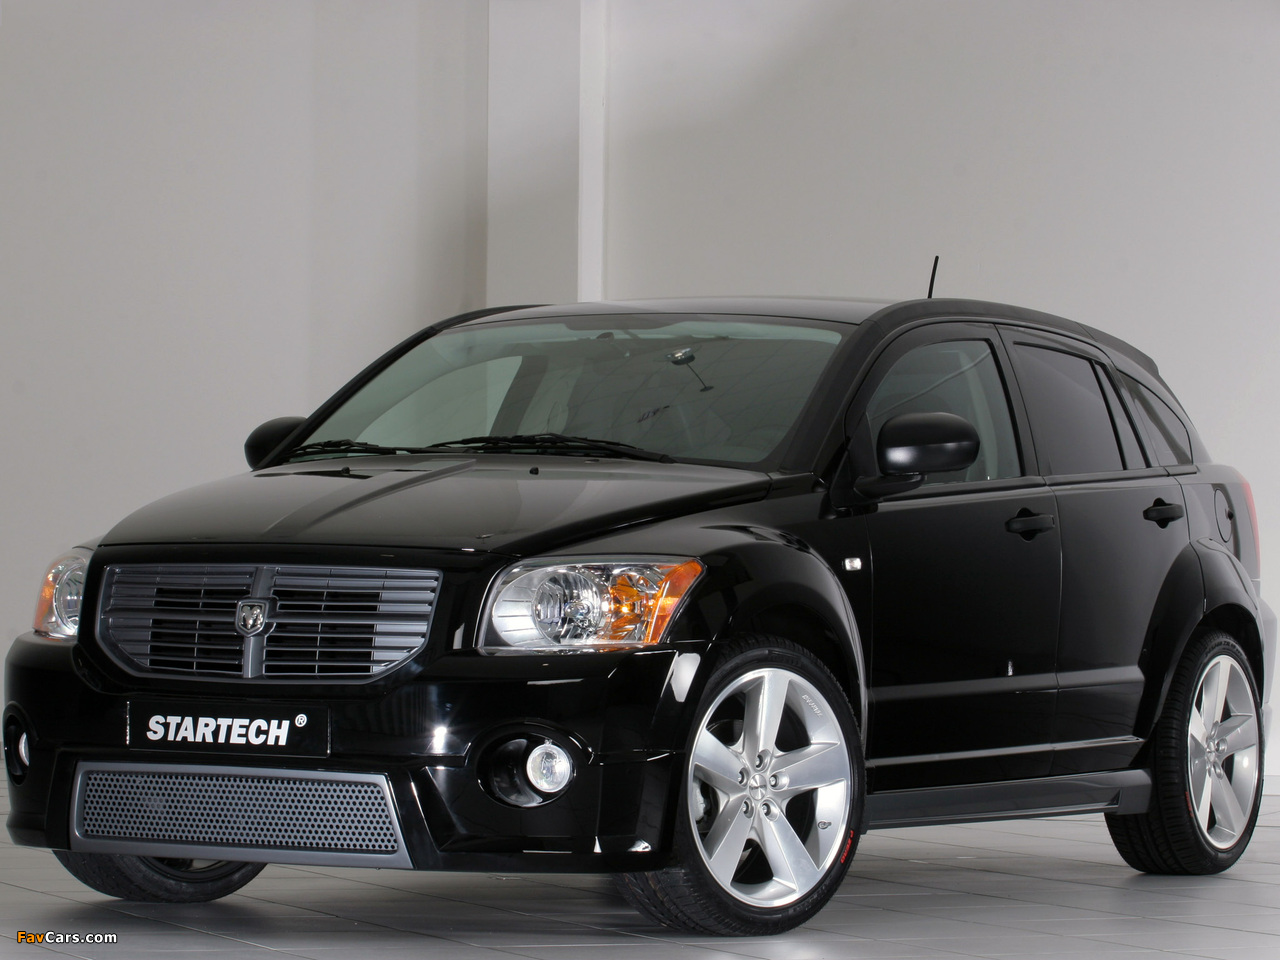 Startech Dodge Caliber 2006 pictures (1280 x 960)